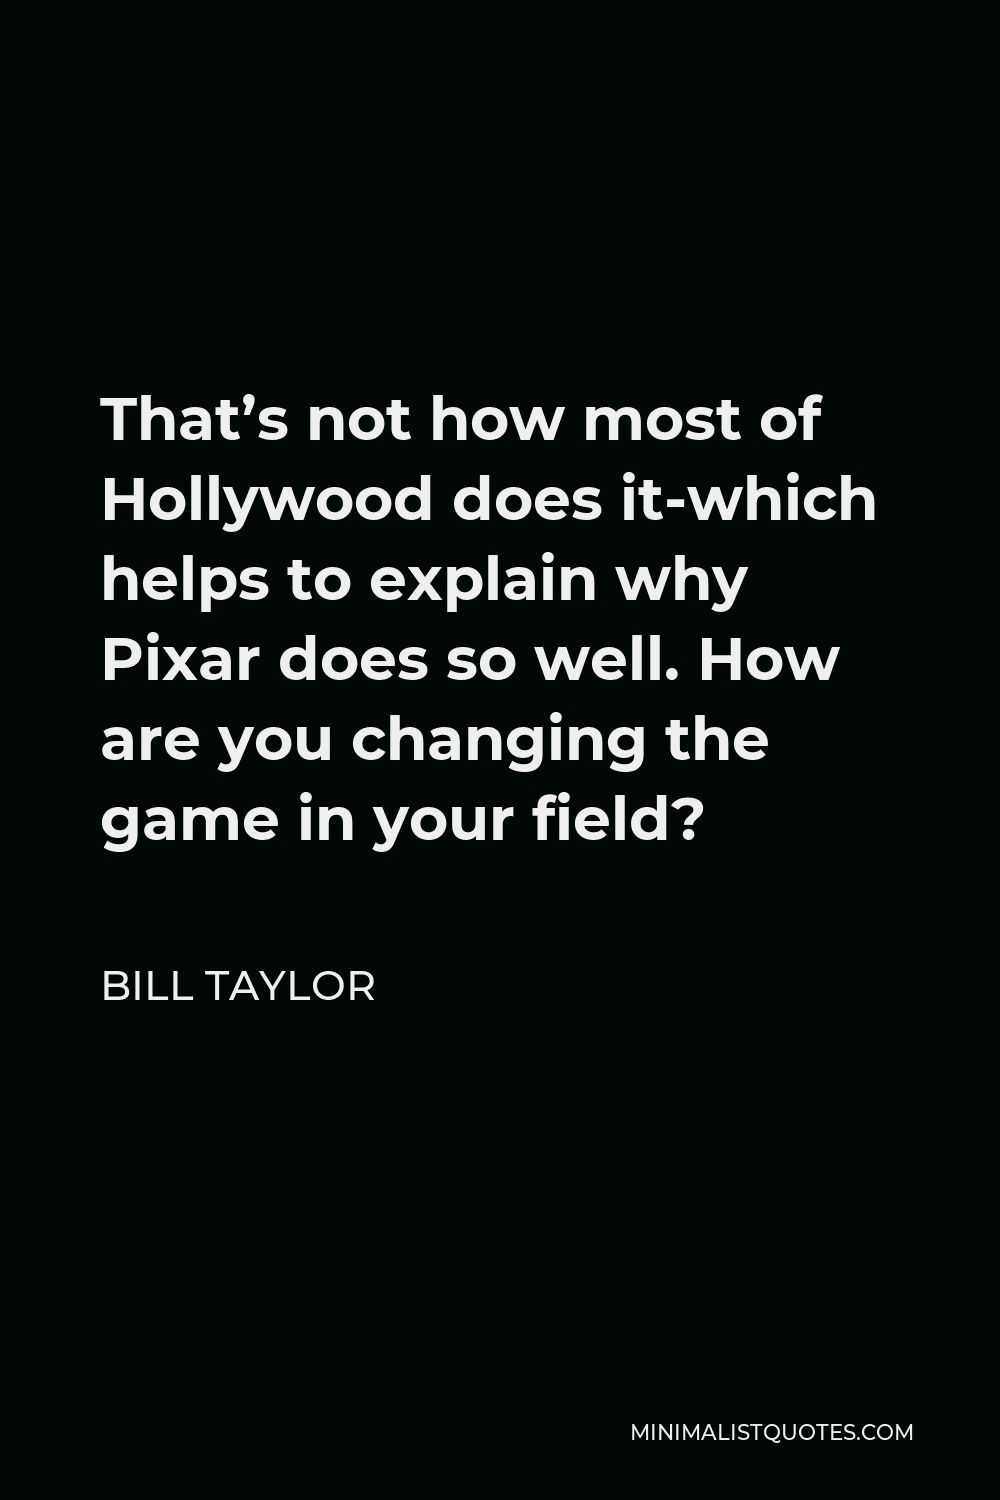 Bill Taylor Quote - That’s not how most of Hollywood does it-which helps to explain why Pixar does so well. How are you changing the game in your field?